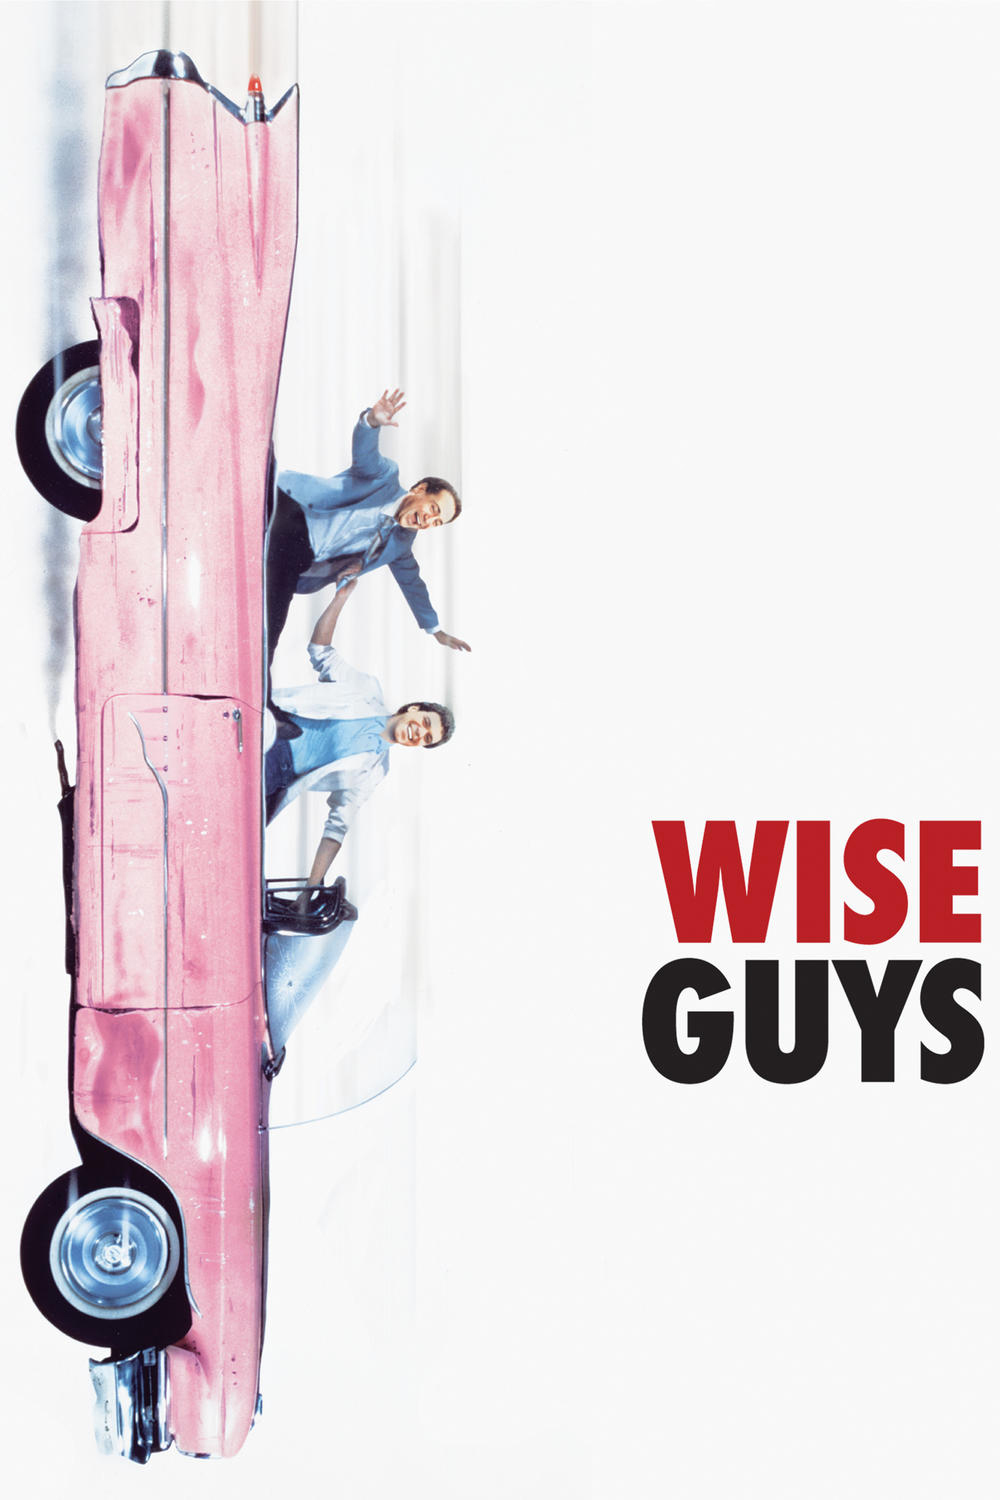 Poster for the movie "Wise Guys"